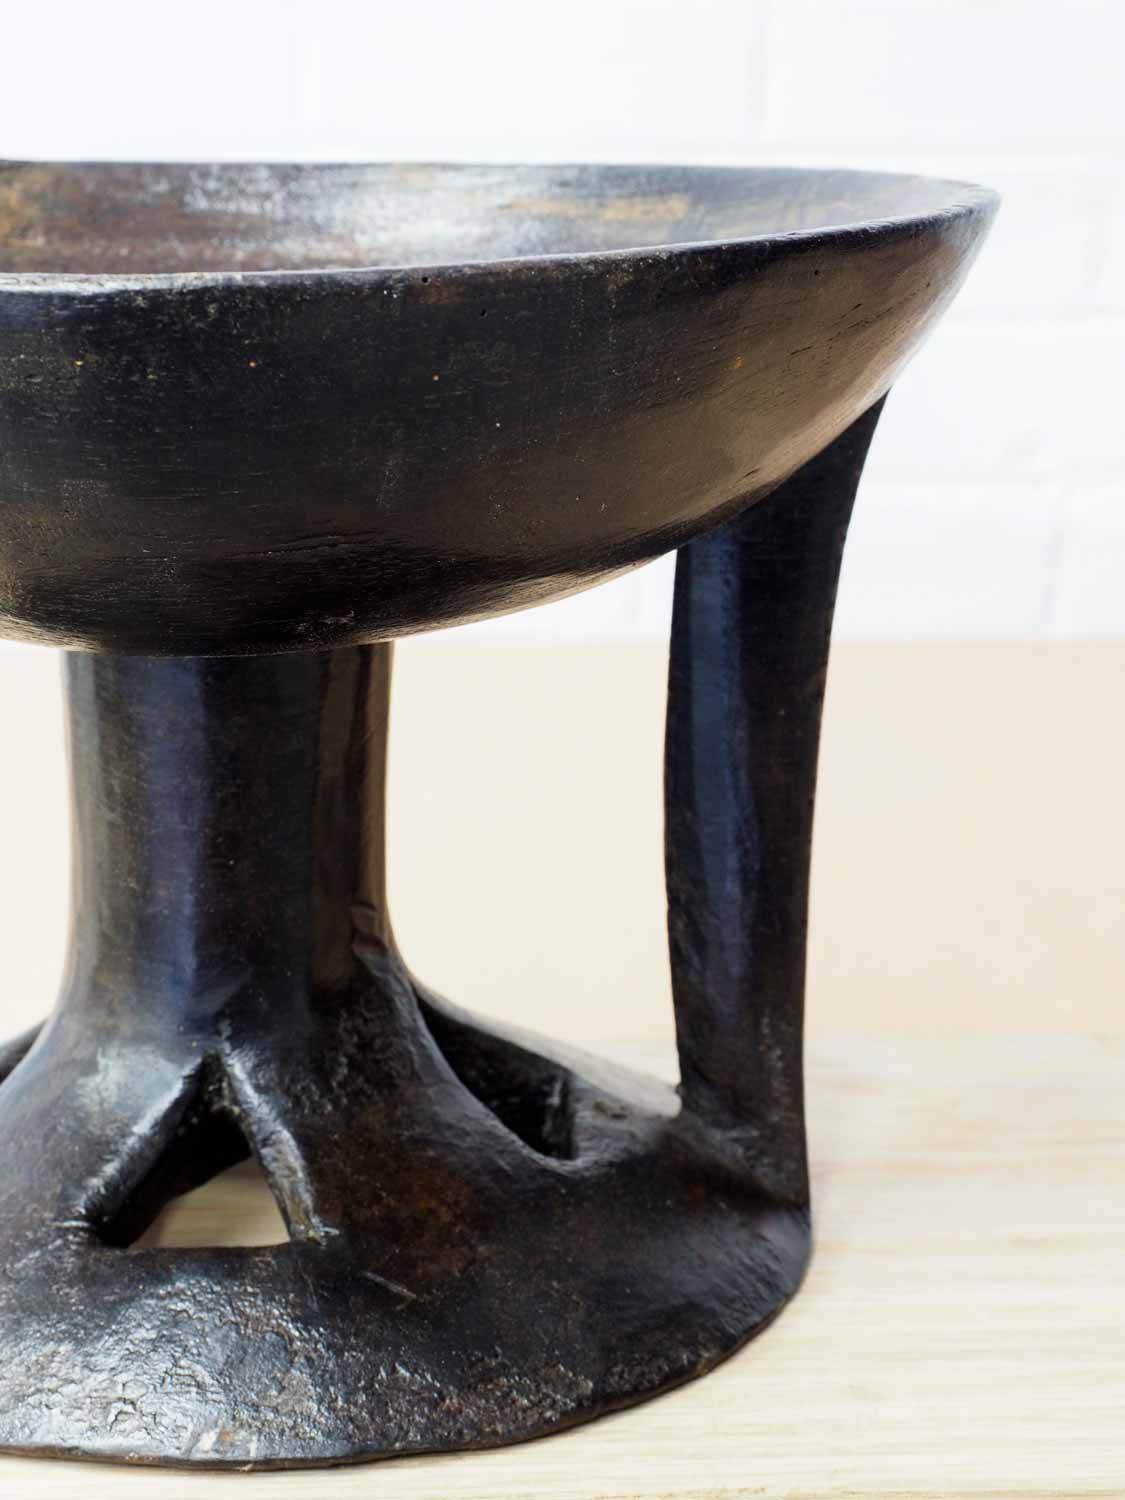 Dark Wooden Bowl with Long Stem